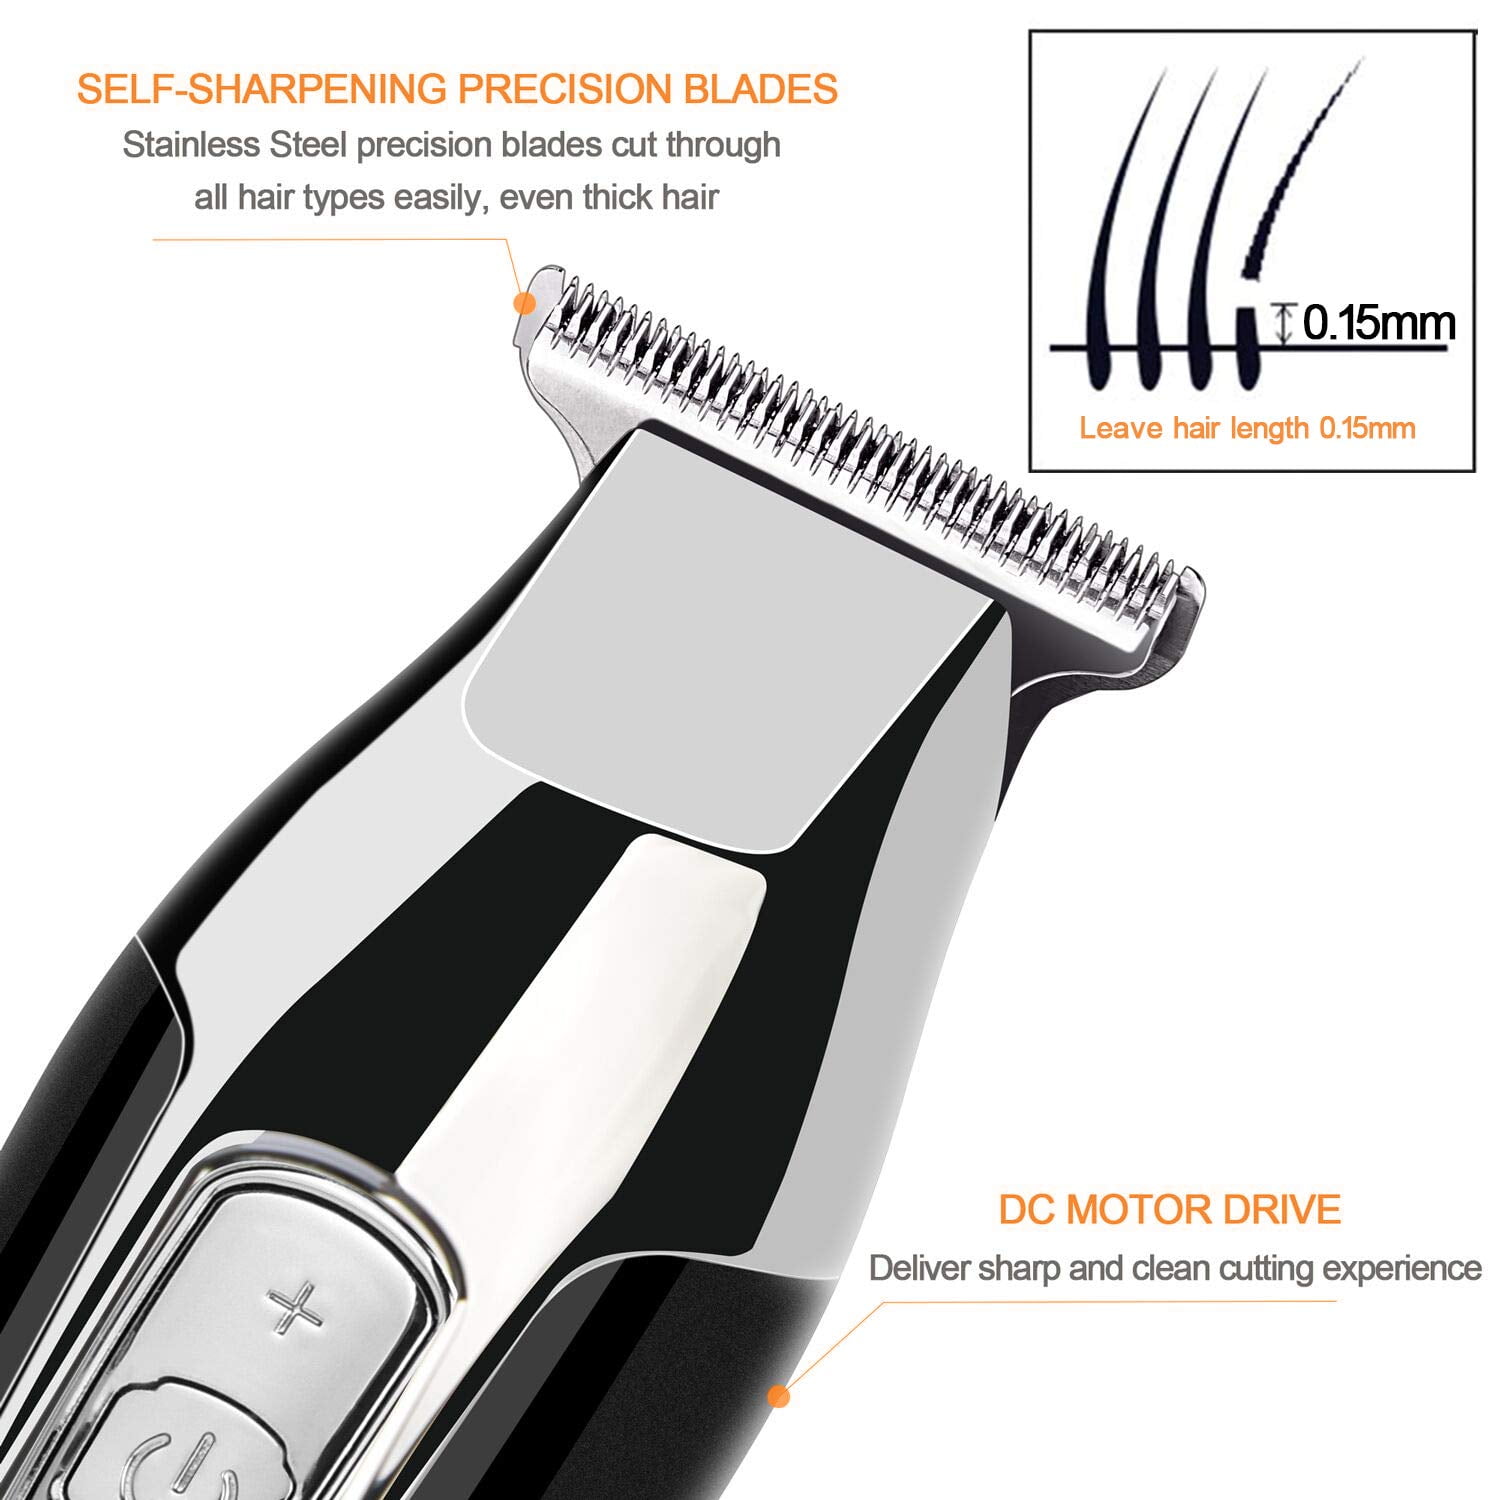 renpho trimmer review